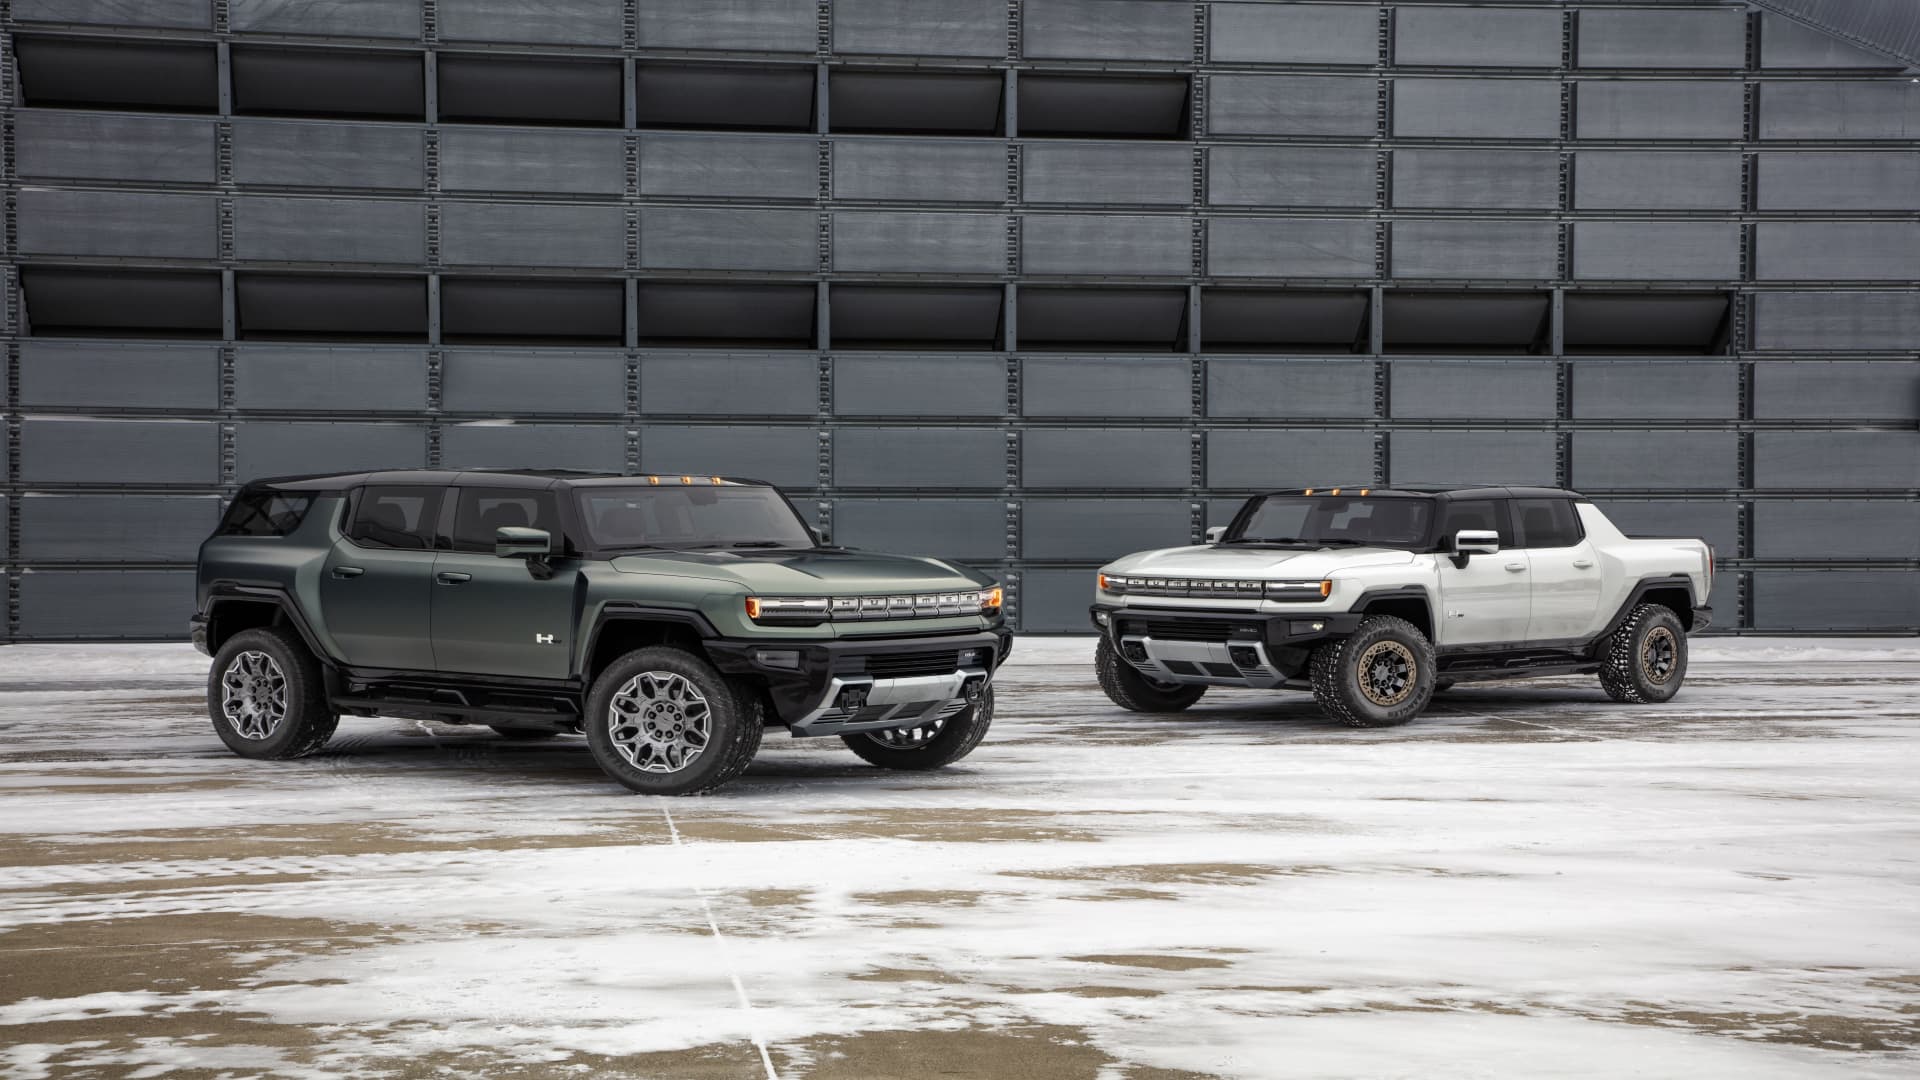 The 2024 GMC Hummer EV SUV and 2022 GMC Hummer EV sport utility truck, or SUT.